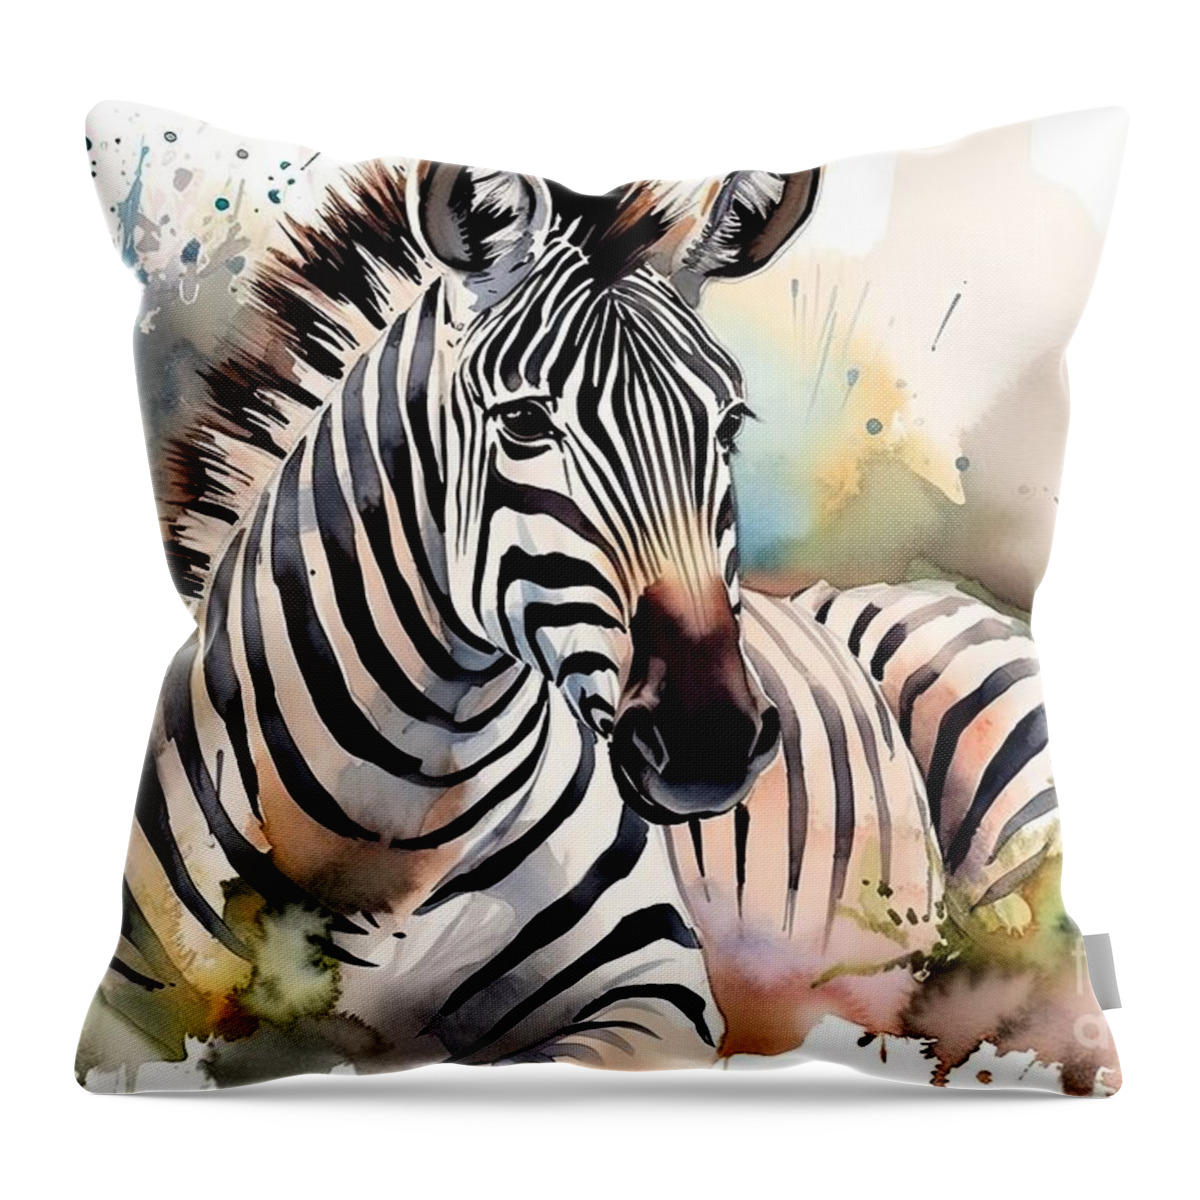 Animal Throw Pillow featuring the painting Zebra. Wild Animals Watercolor Illustration by N Akkash